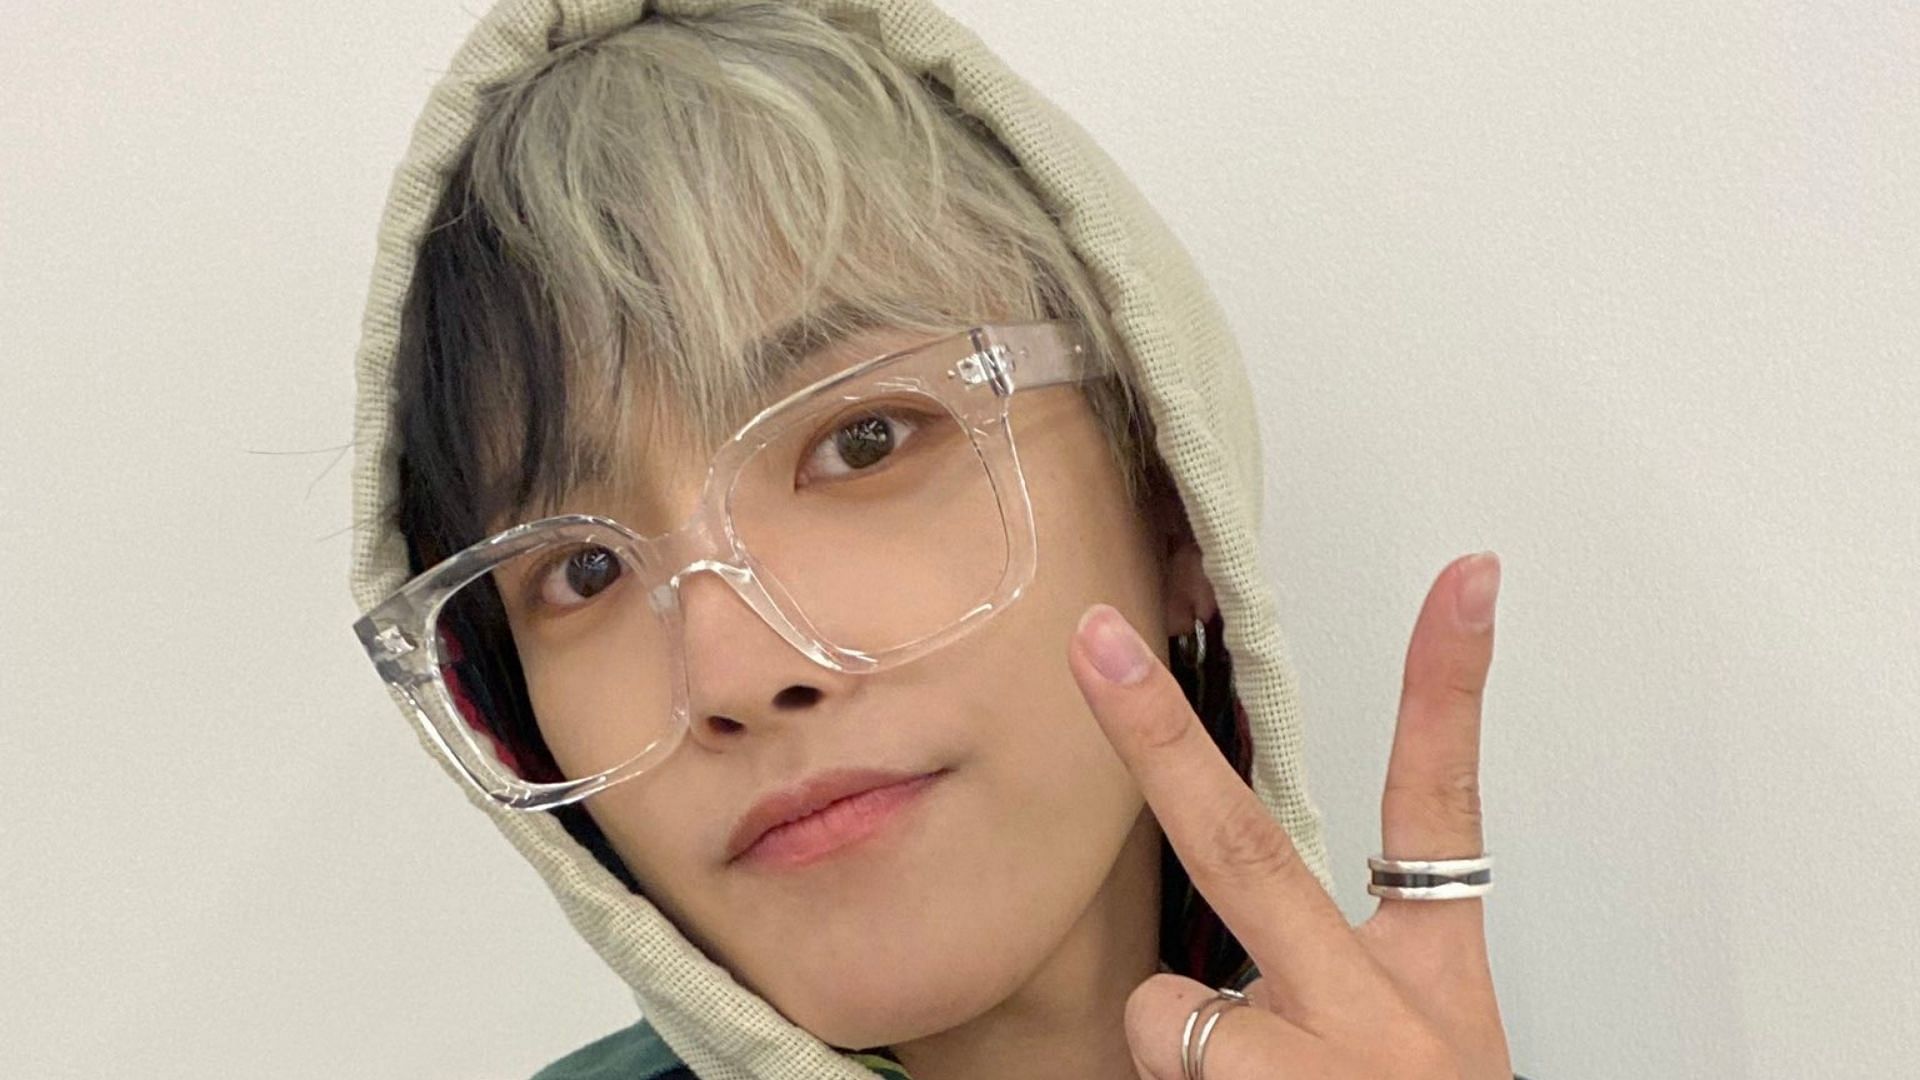 Fans love ATEEZ&rsquo;s Hongjoong&#039;s two-toned hair color (Image via @ATEEZofficial/Twitter)